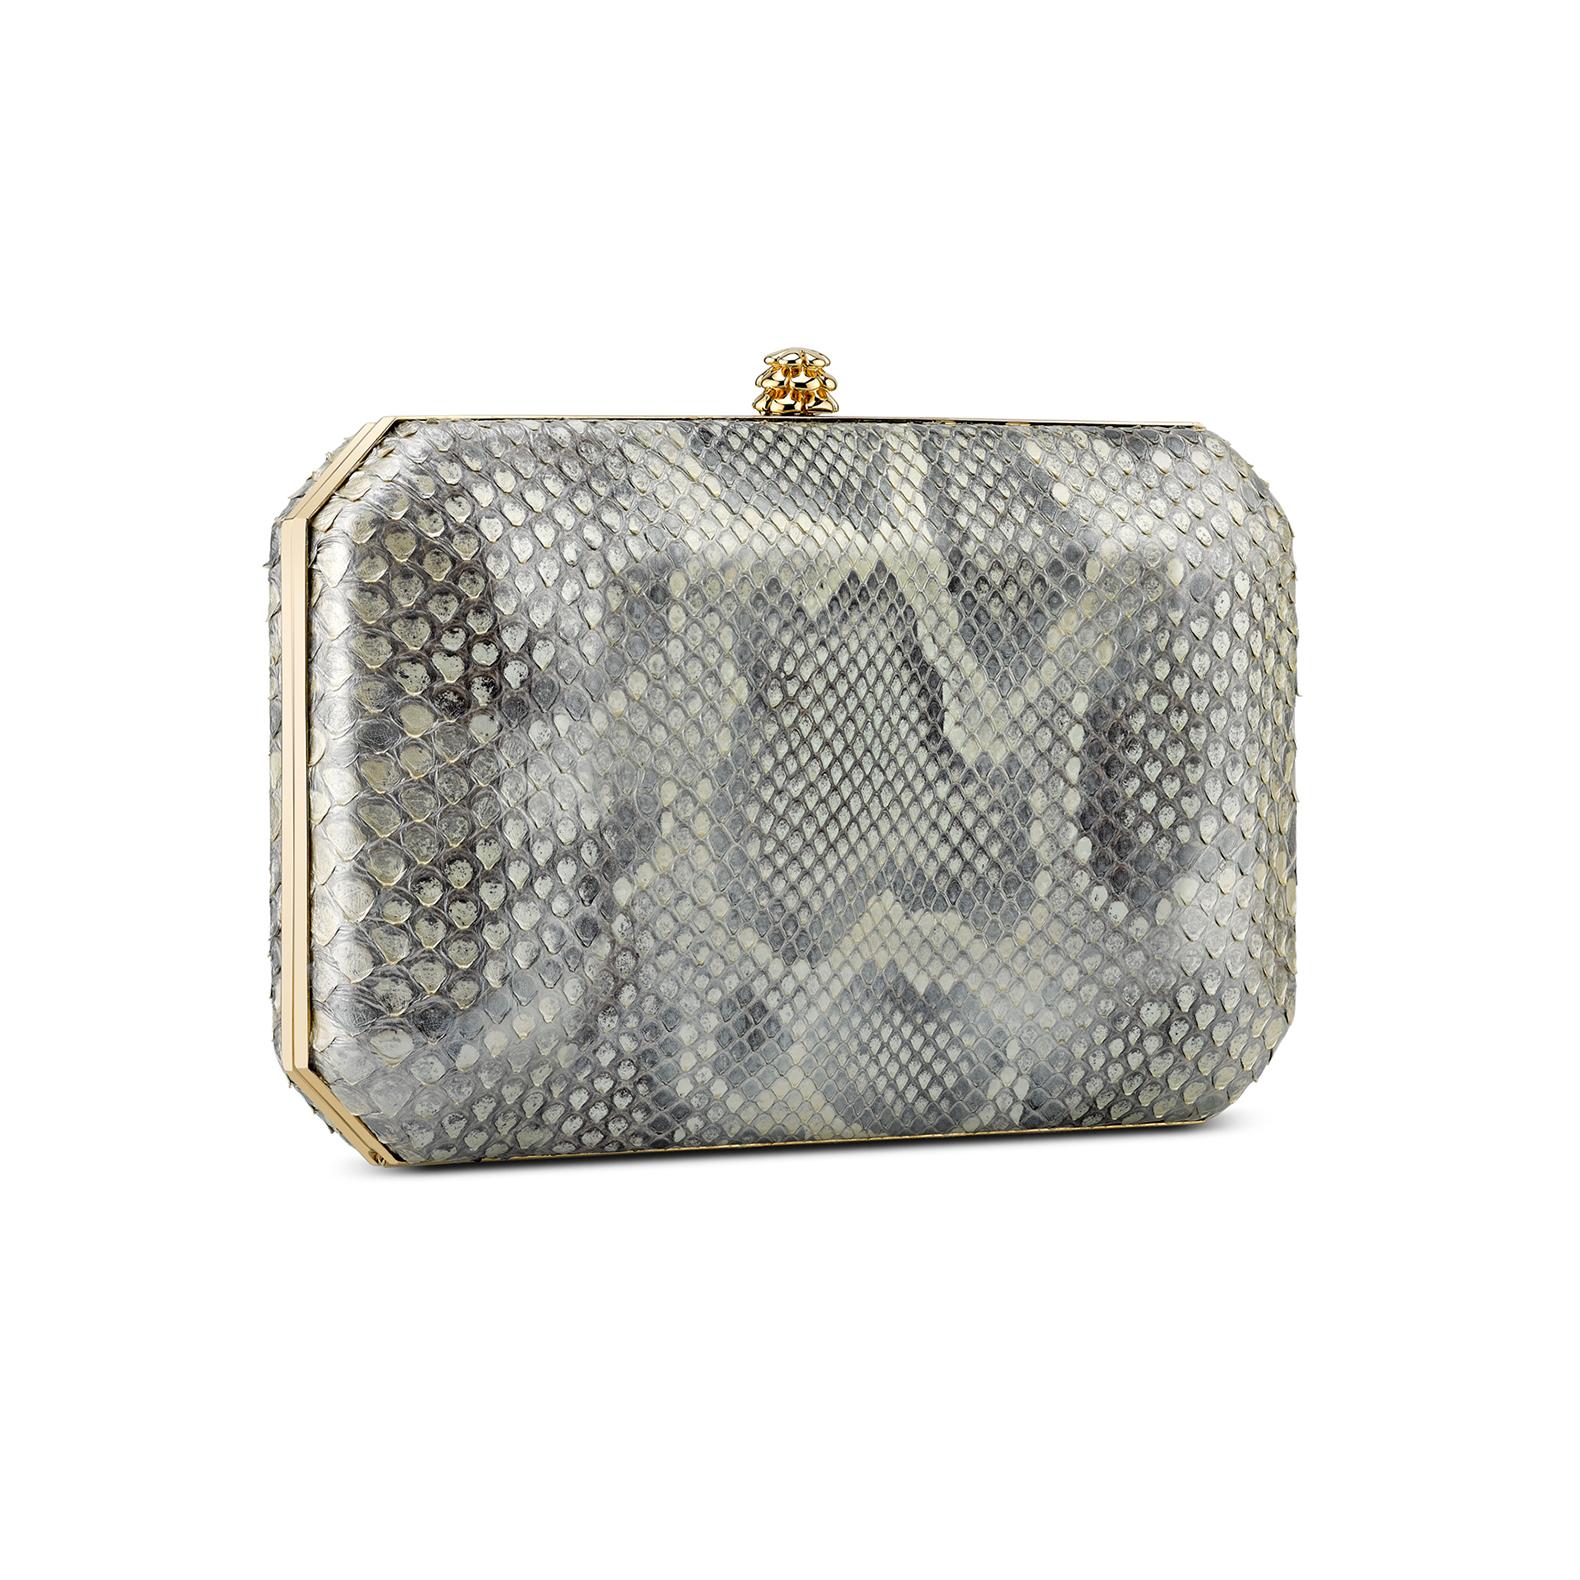 The Lily Clutch in Golden Dust Glossy Python Gold Hardware is a hard-framed rectangular clutch designed with interior pockets and an optional cross-body chain. It fits the iPhone 8+ and features our signature pinecone closure and Thayer Blue